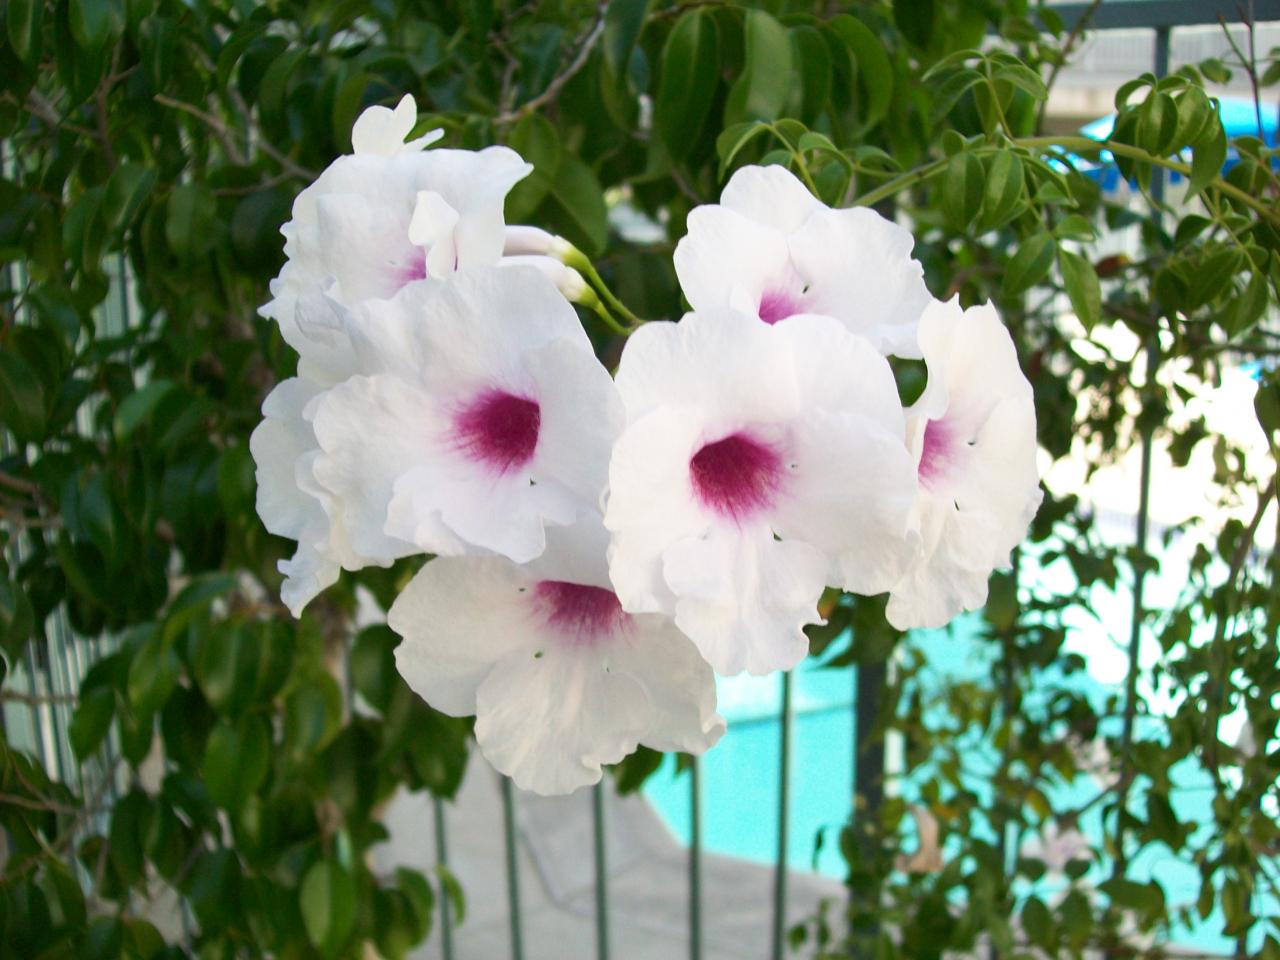 Photo of Kingsbury Villas Apartments - a close up view of some flowers form the landscaping